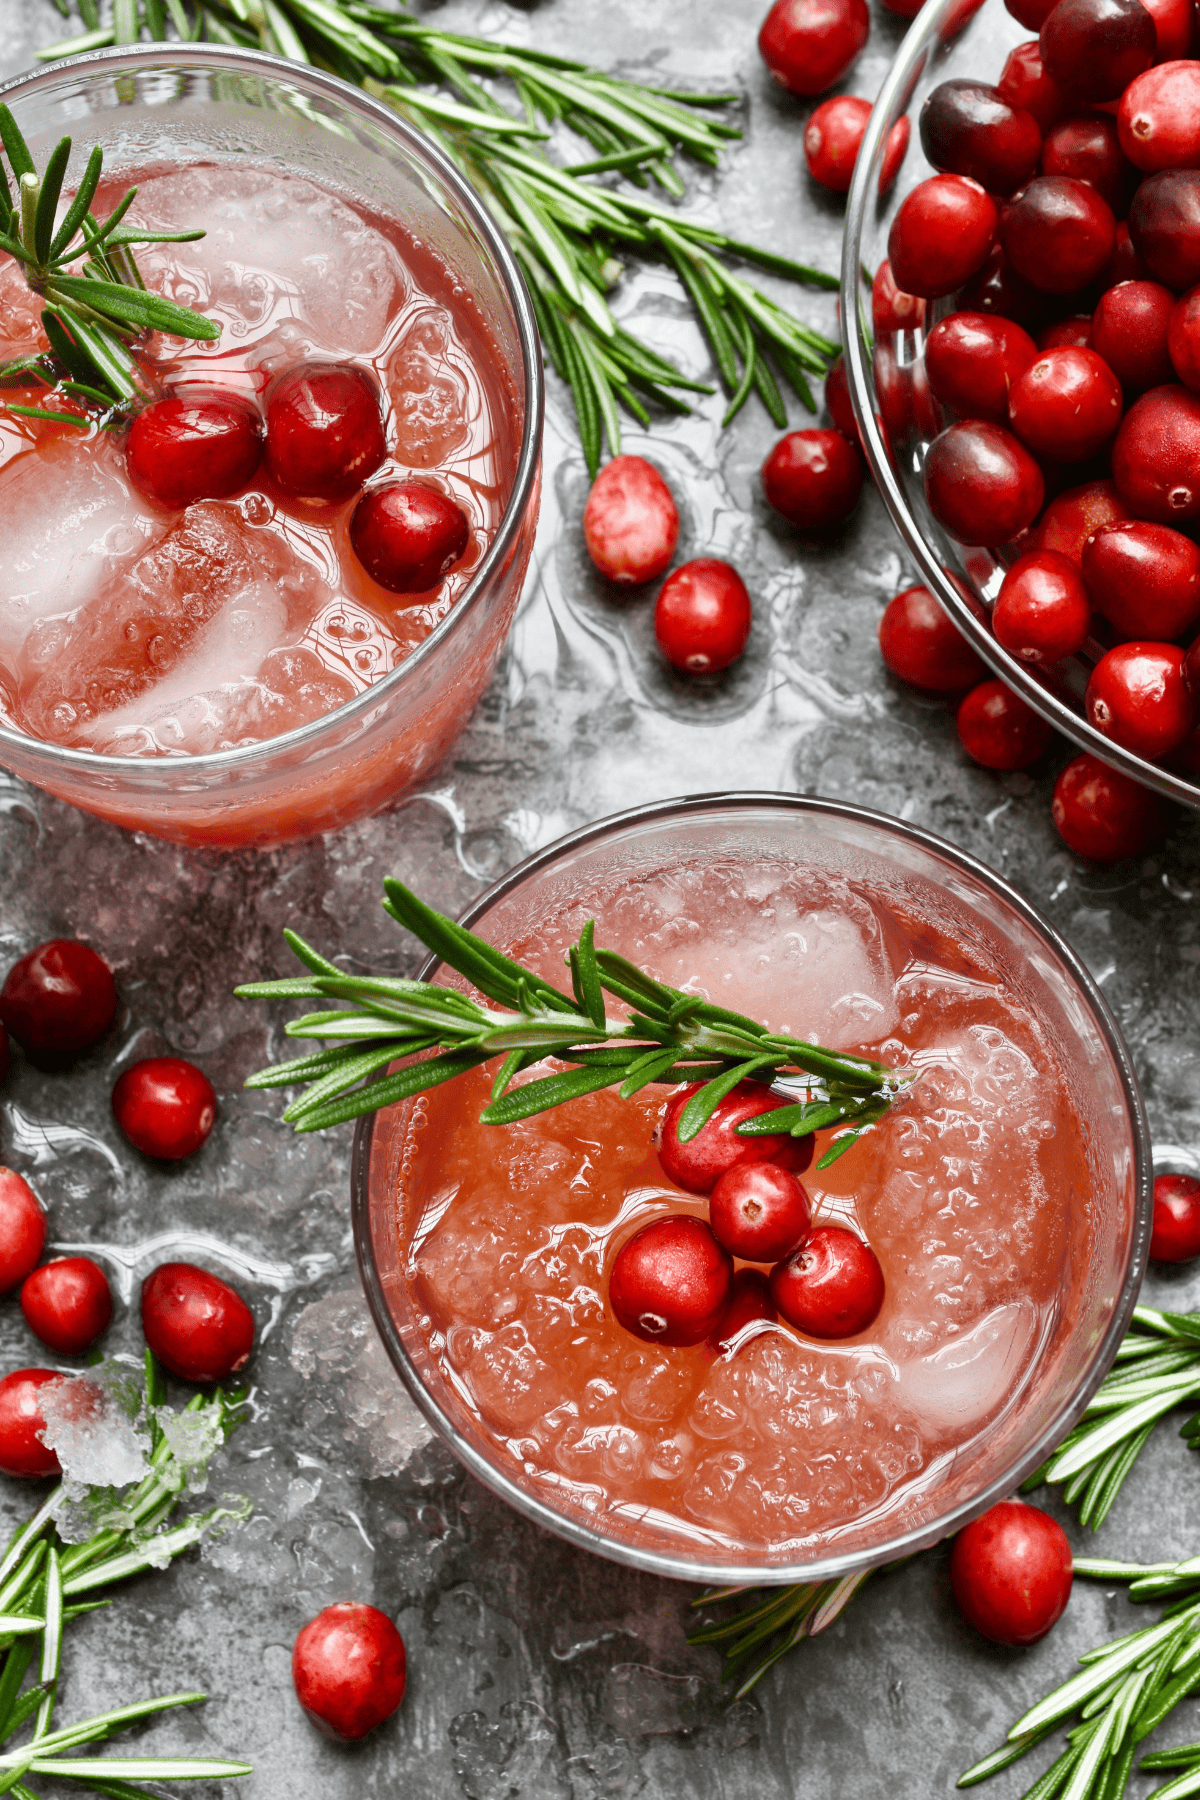 Glasses of a holiday alcoholic drink with fresh garnishes.  